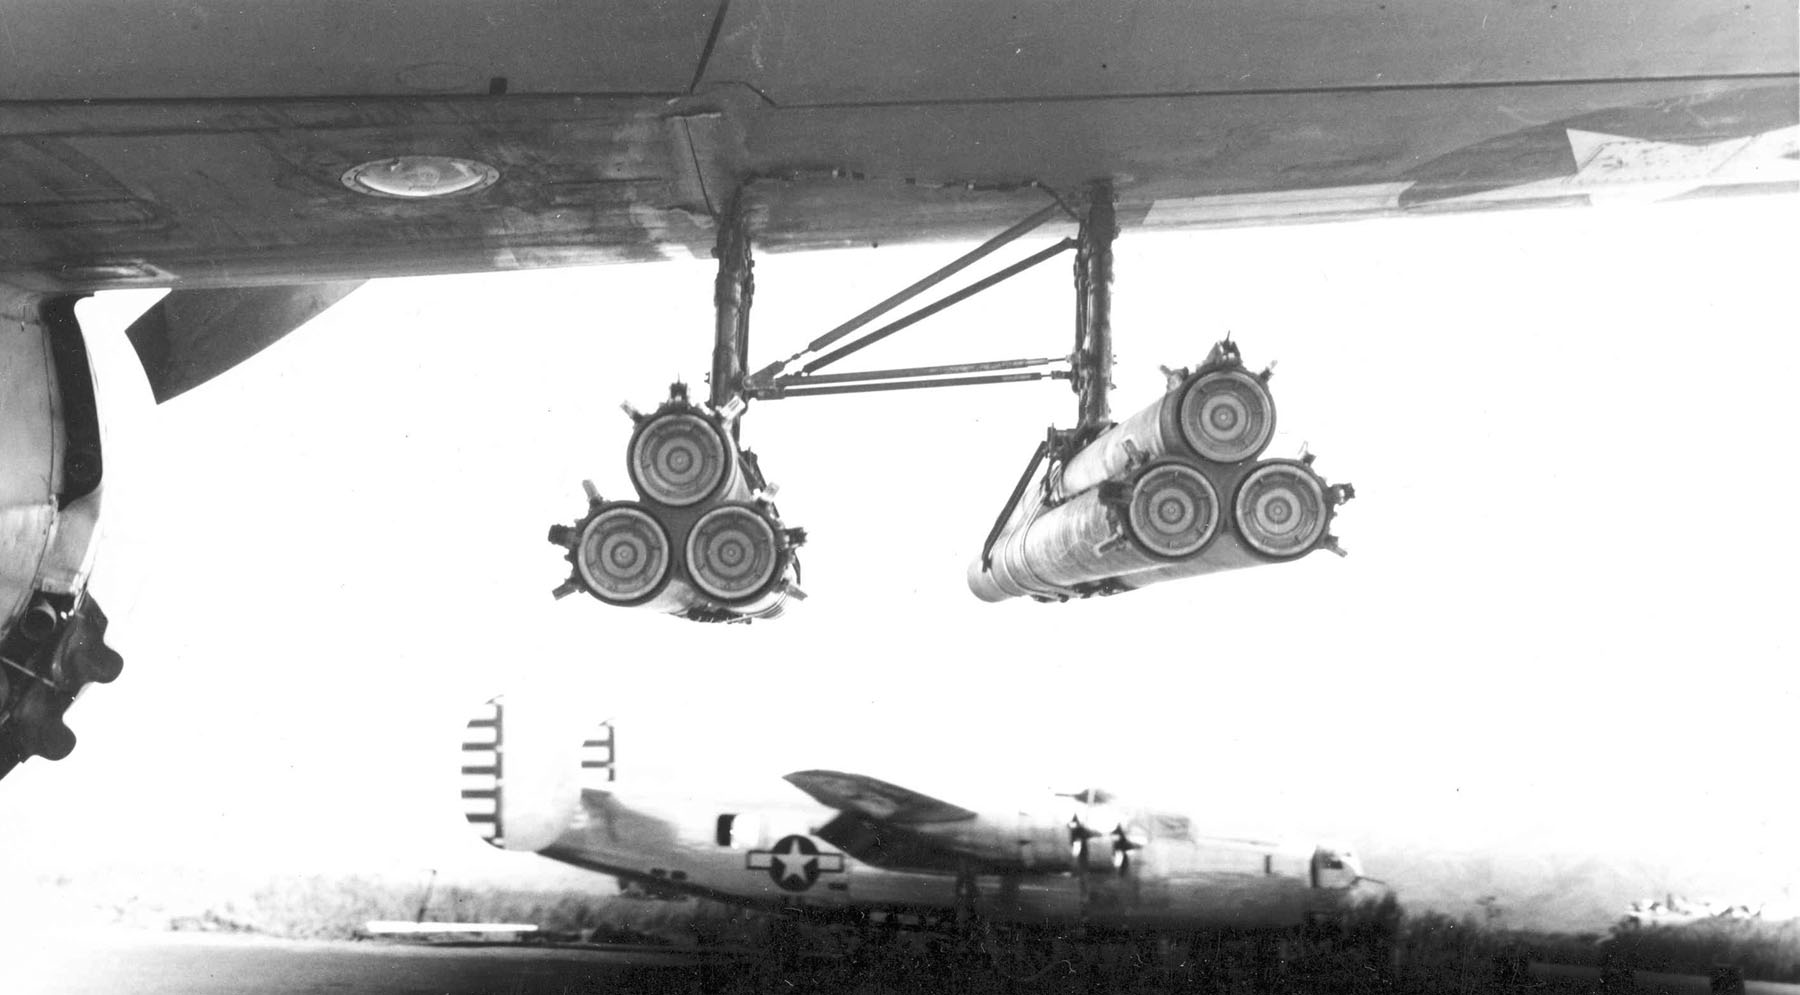 Close-up view of T30 rocket launchers mounted under the wing of an A-20 Havoc aircraft of 90th Attack Squadron, US 3rd Attack Group, Hollandia, New Guinea, mid-1944